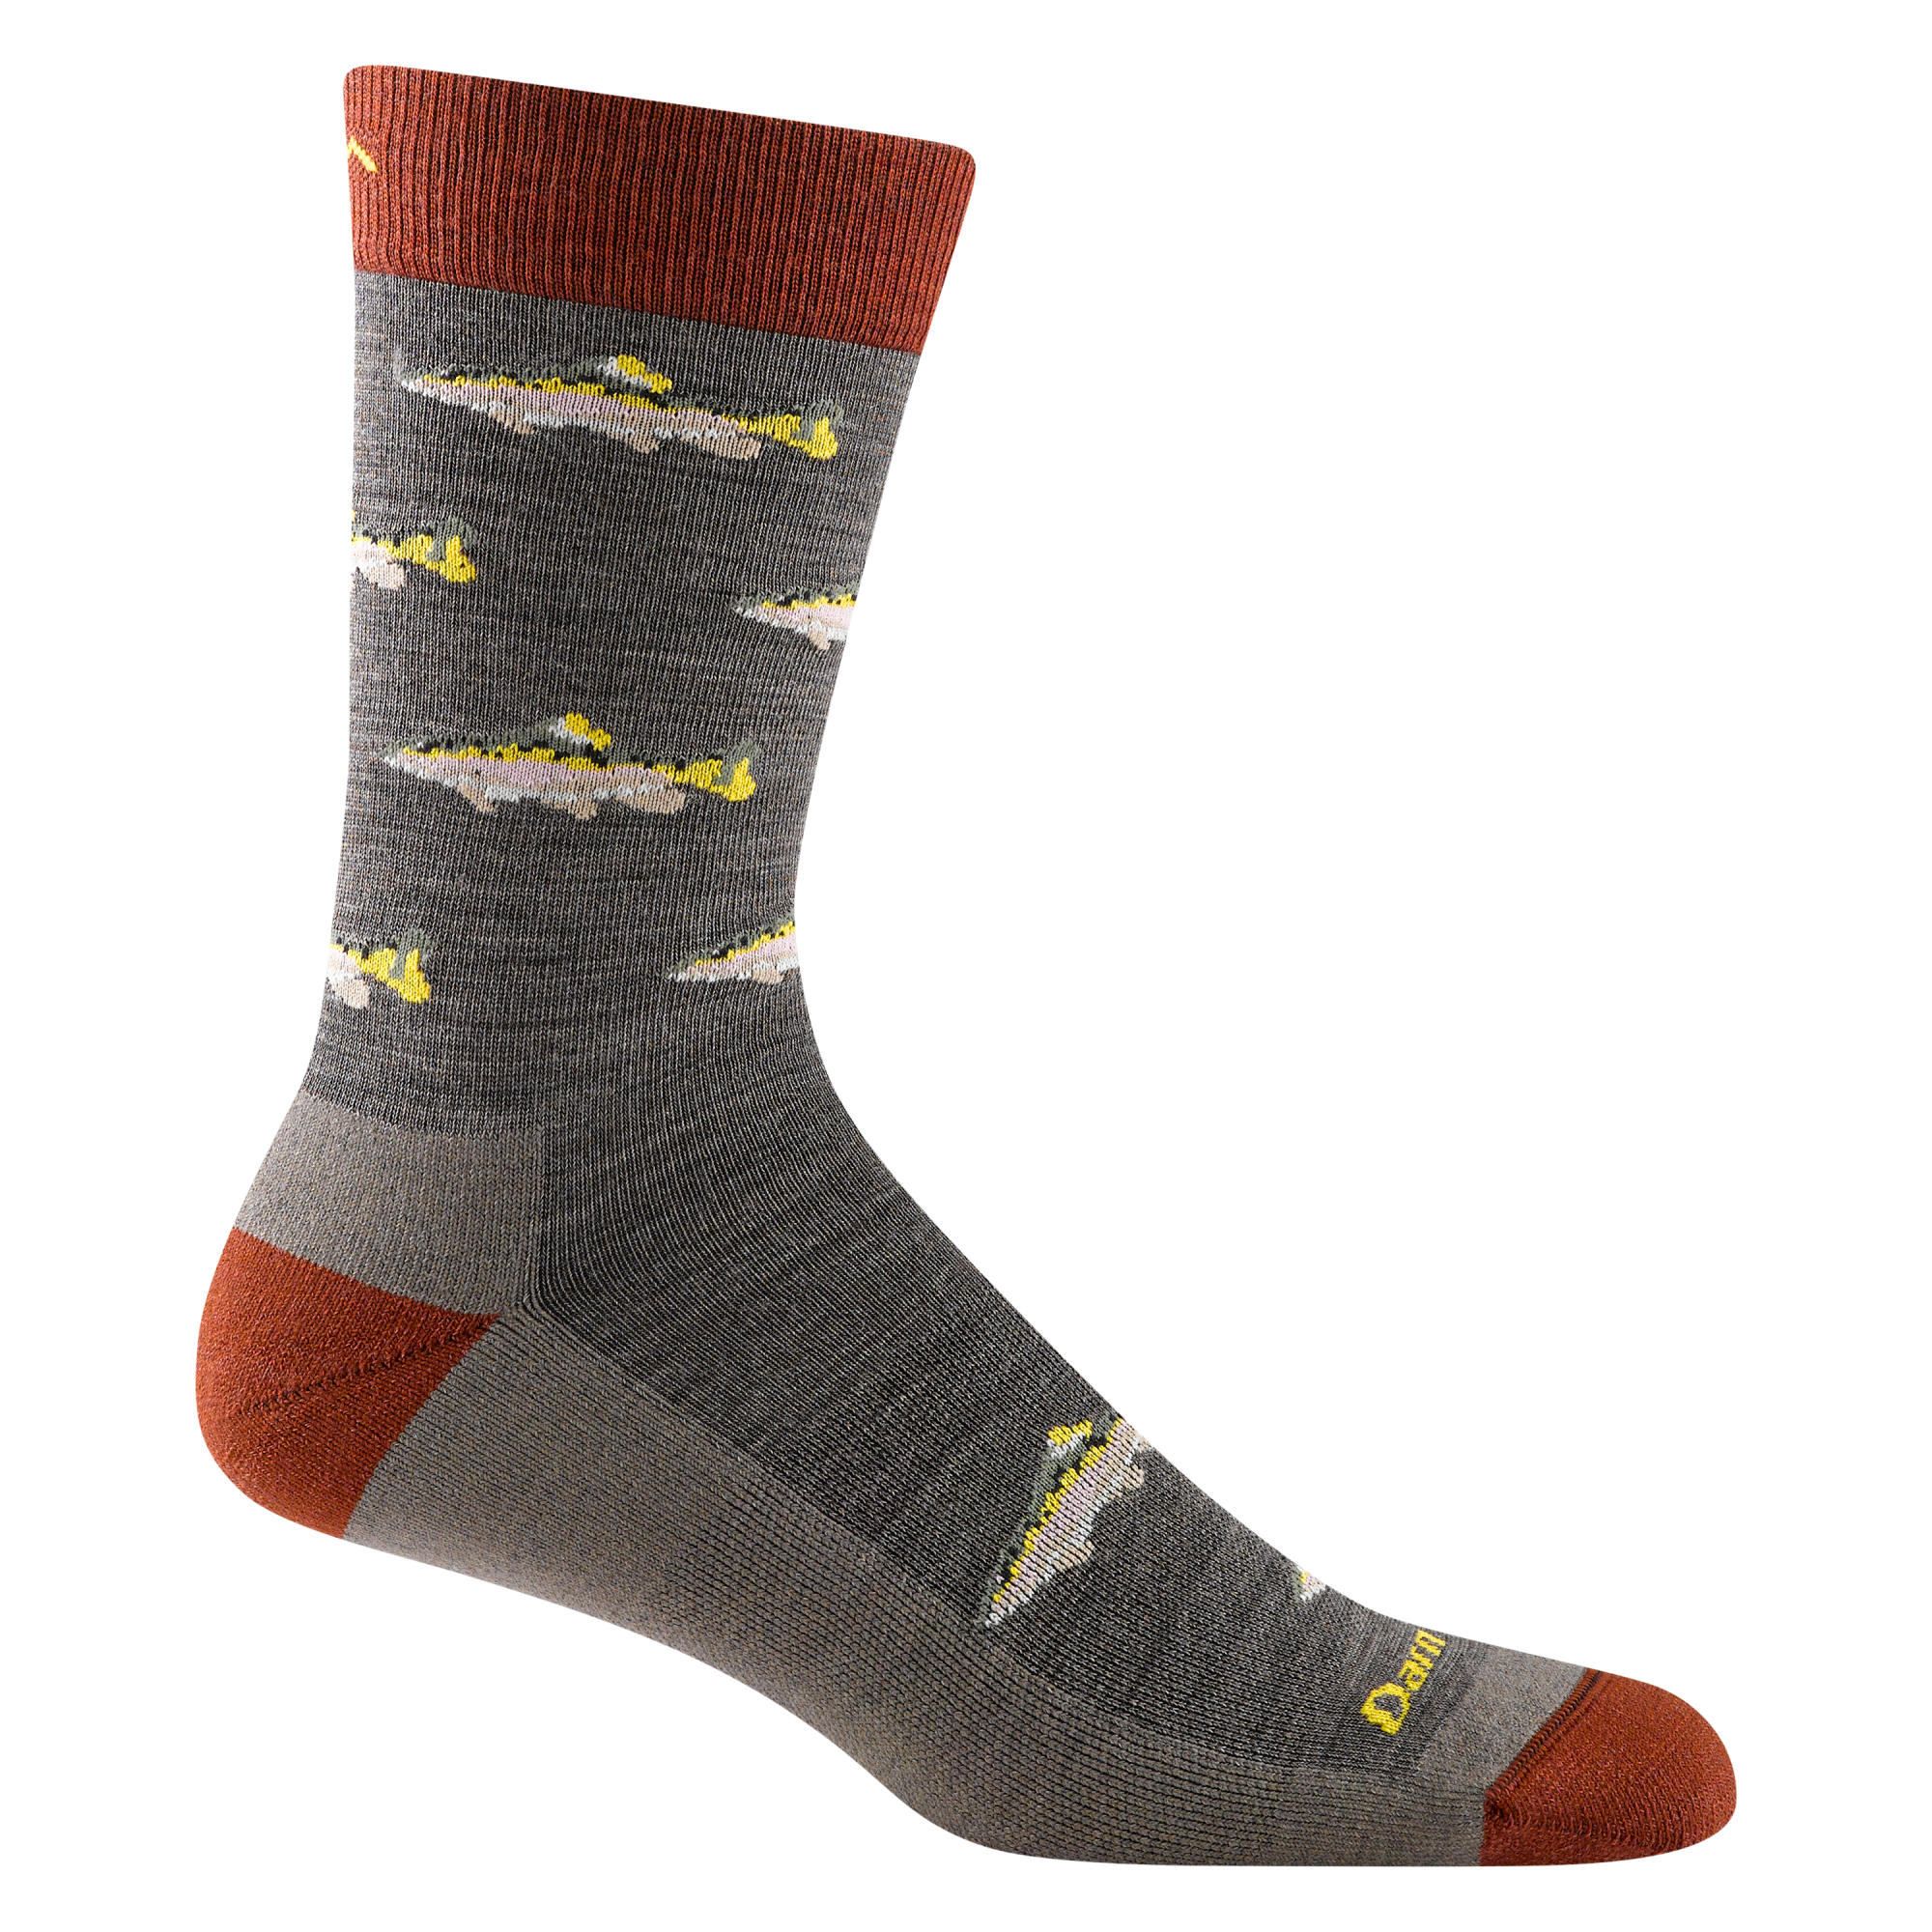 6085 men's spey fly crew lifestyle sock in taupe with rust orange toe/heel accents and gray and yellow fishes design